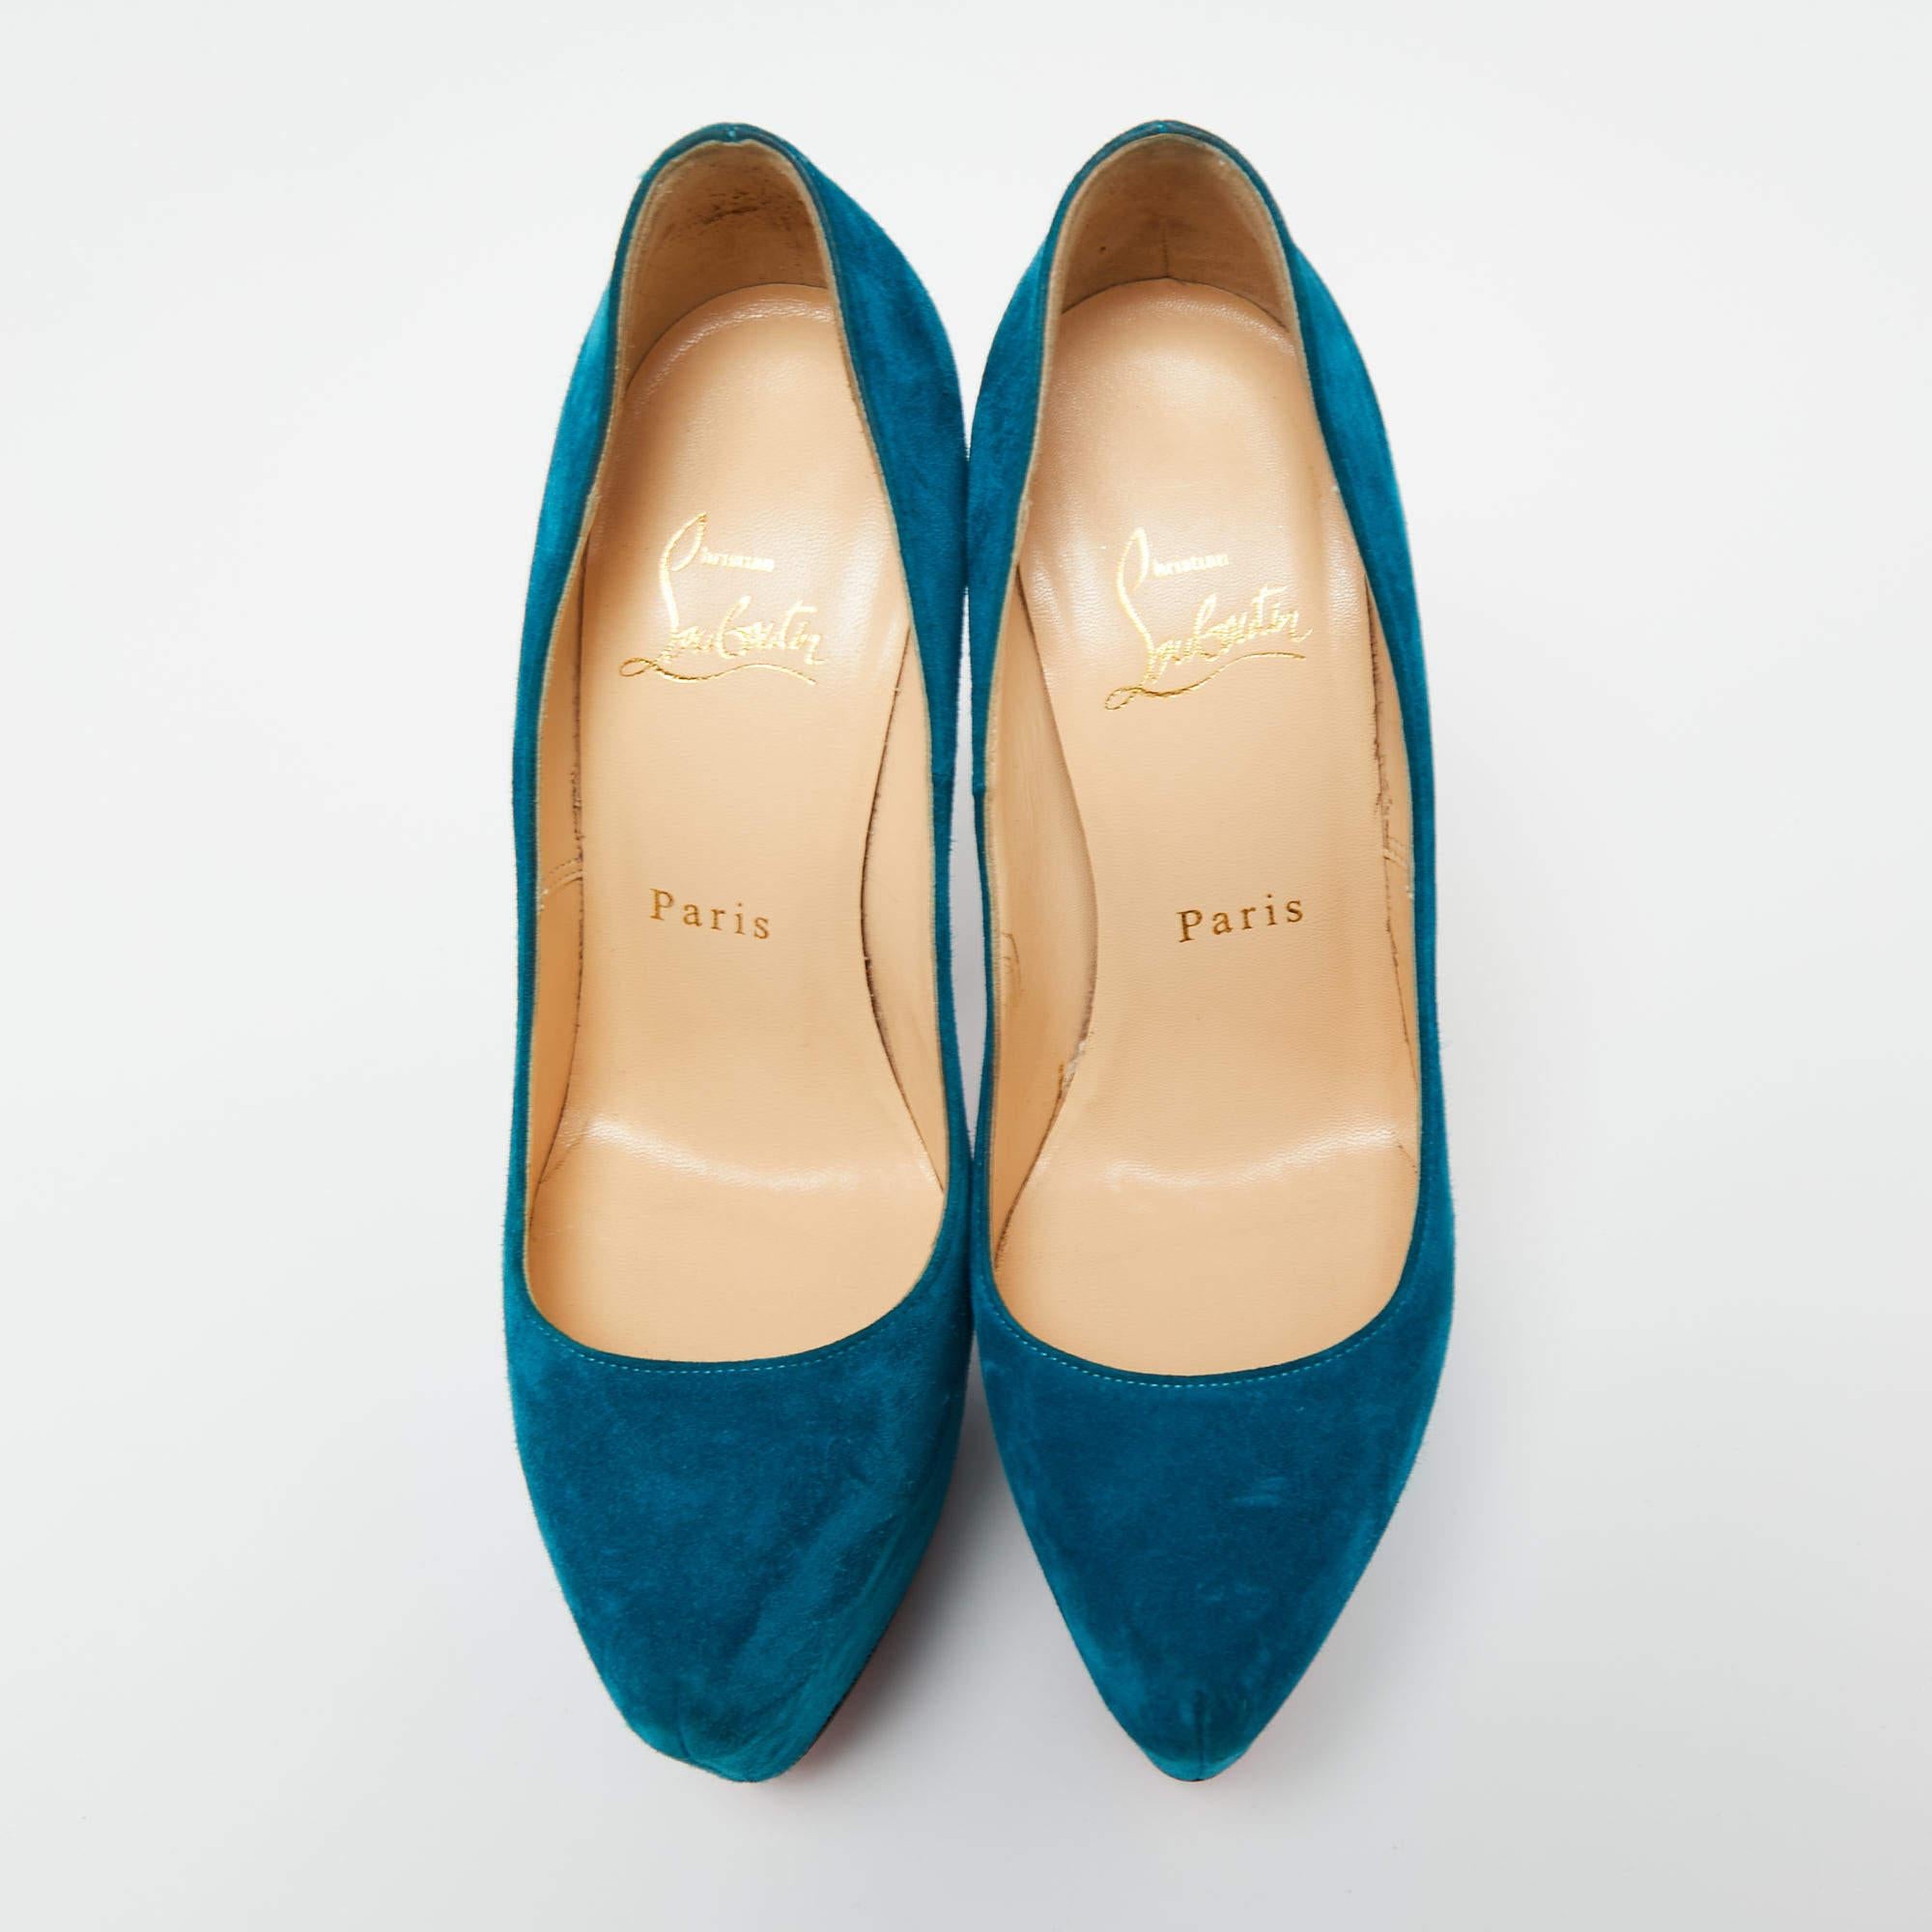 Christian Louboutin Teal Blue Suede Daffodile Platform Pumps Size 36.5 For Sale 1